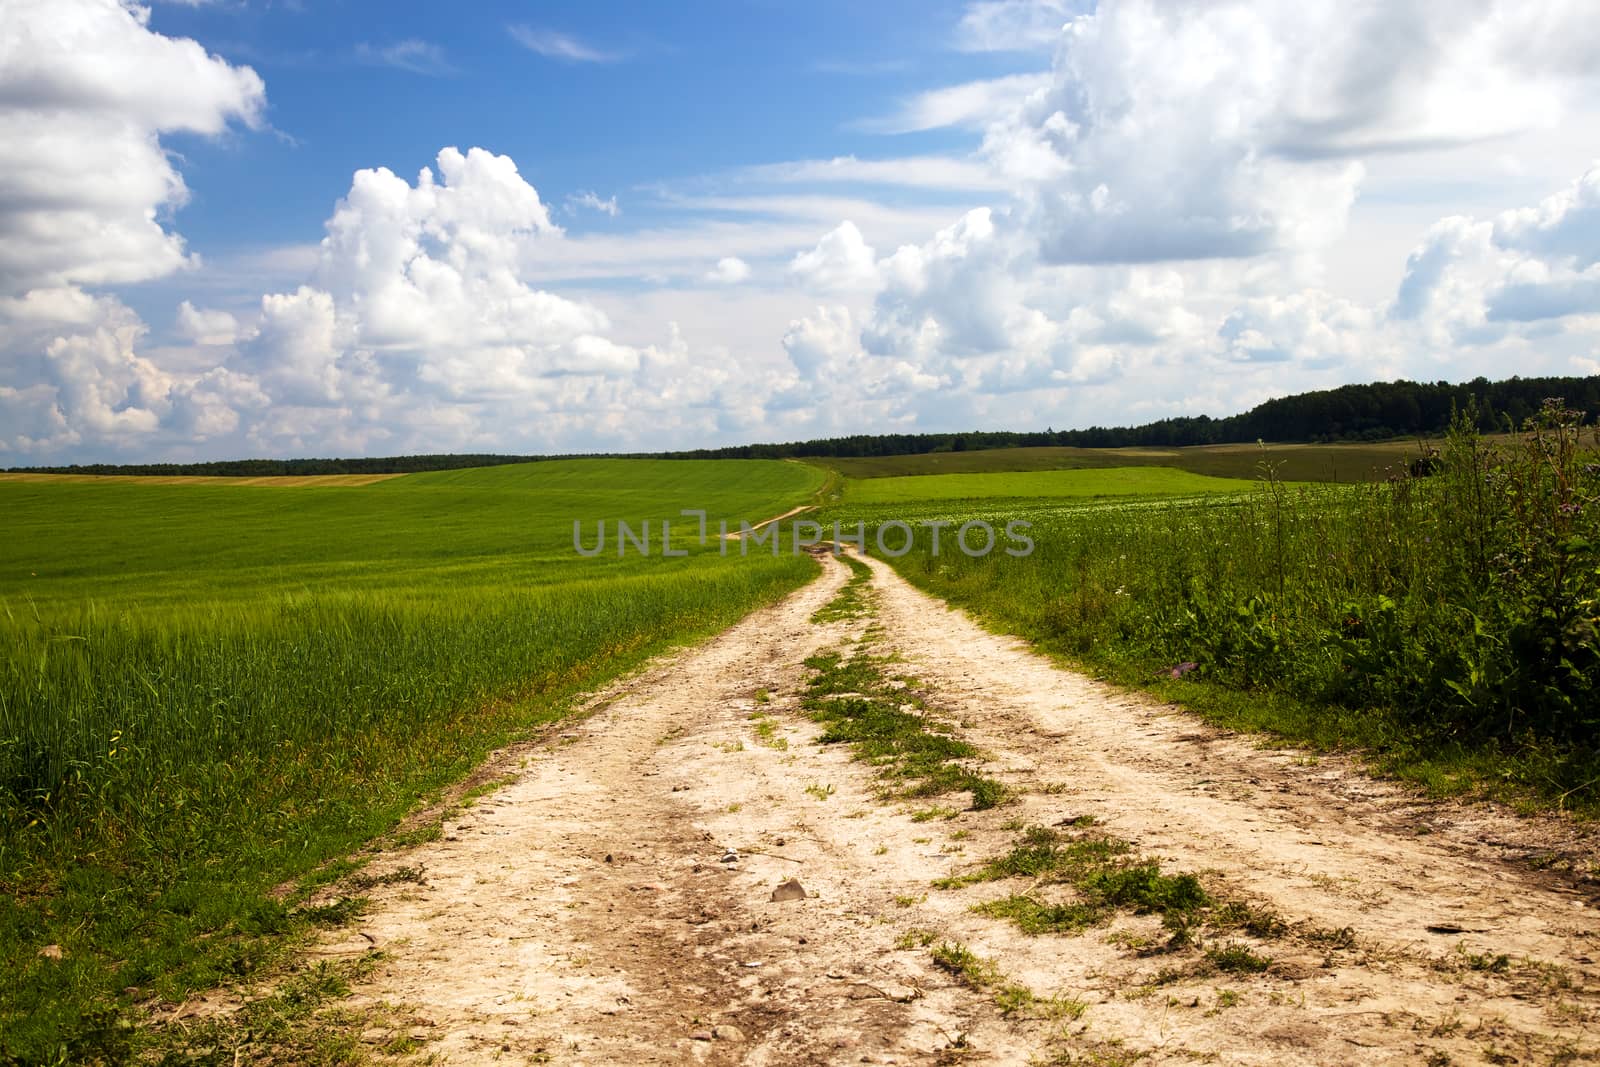  rural road in the summer time year